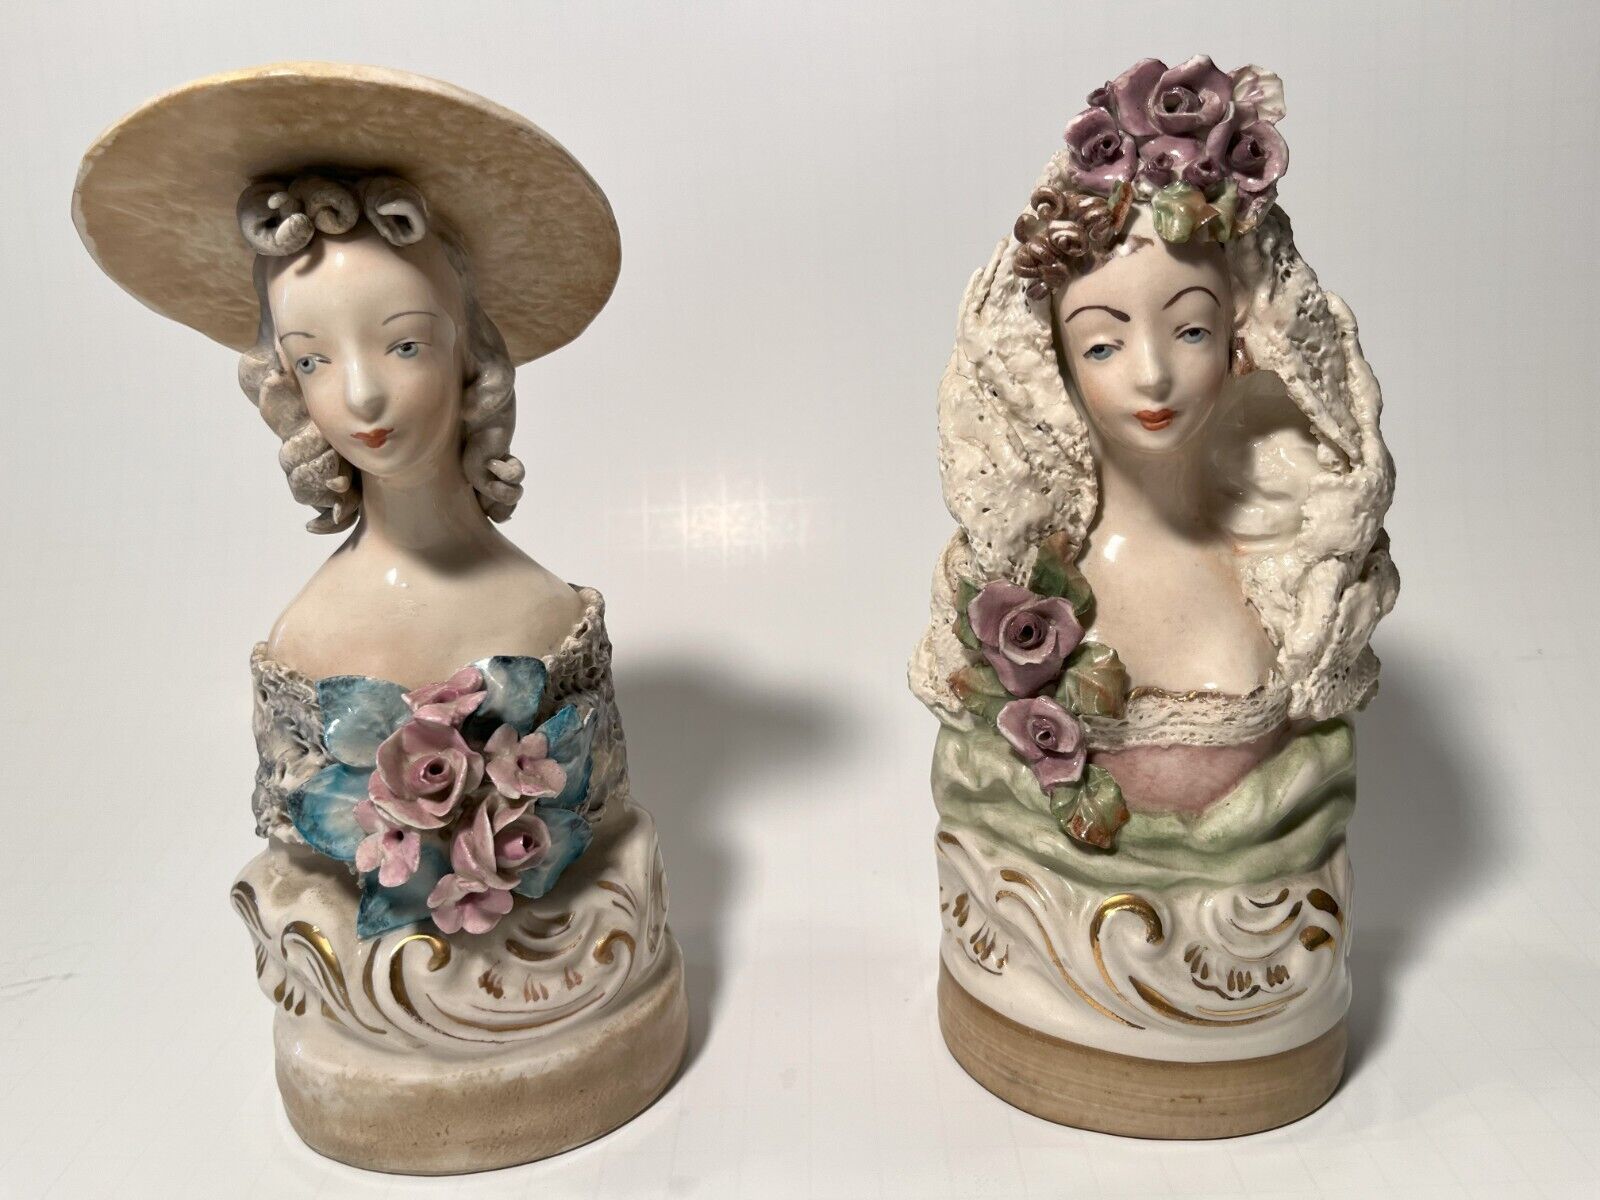 Vintage Cordey China Porcelain Classical Victorian Style Lady, a pair of Artwork